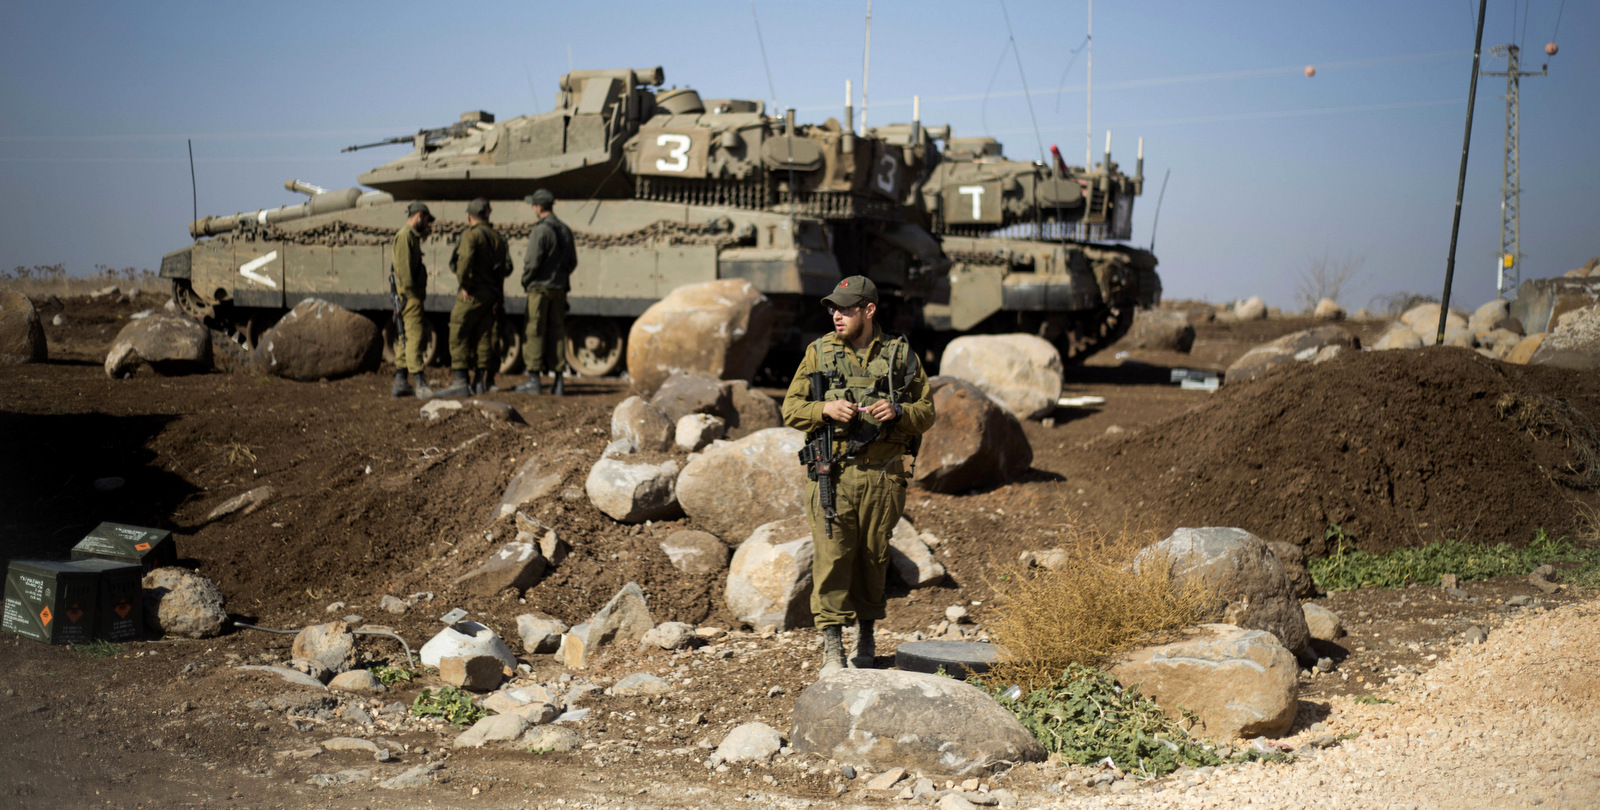 Israeli soldiers gather next to their tanks near the border with Syria in the Israeli-occupied Golan Heights. (AP Photo/Ariel Schalit)